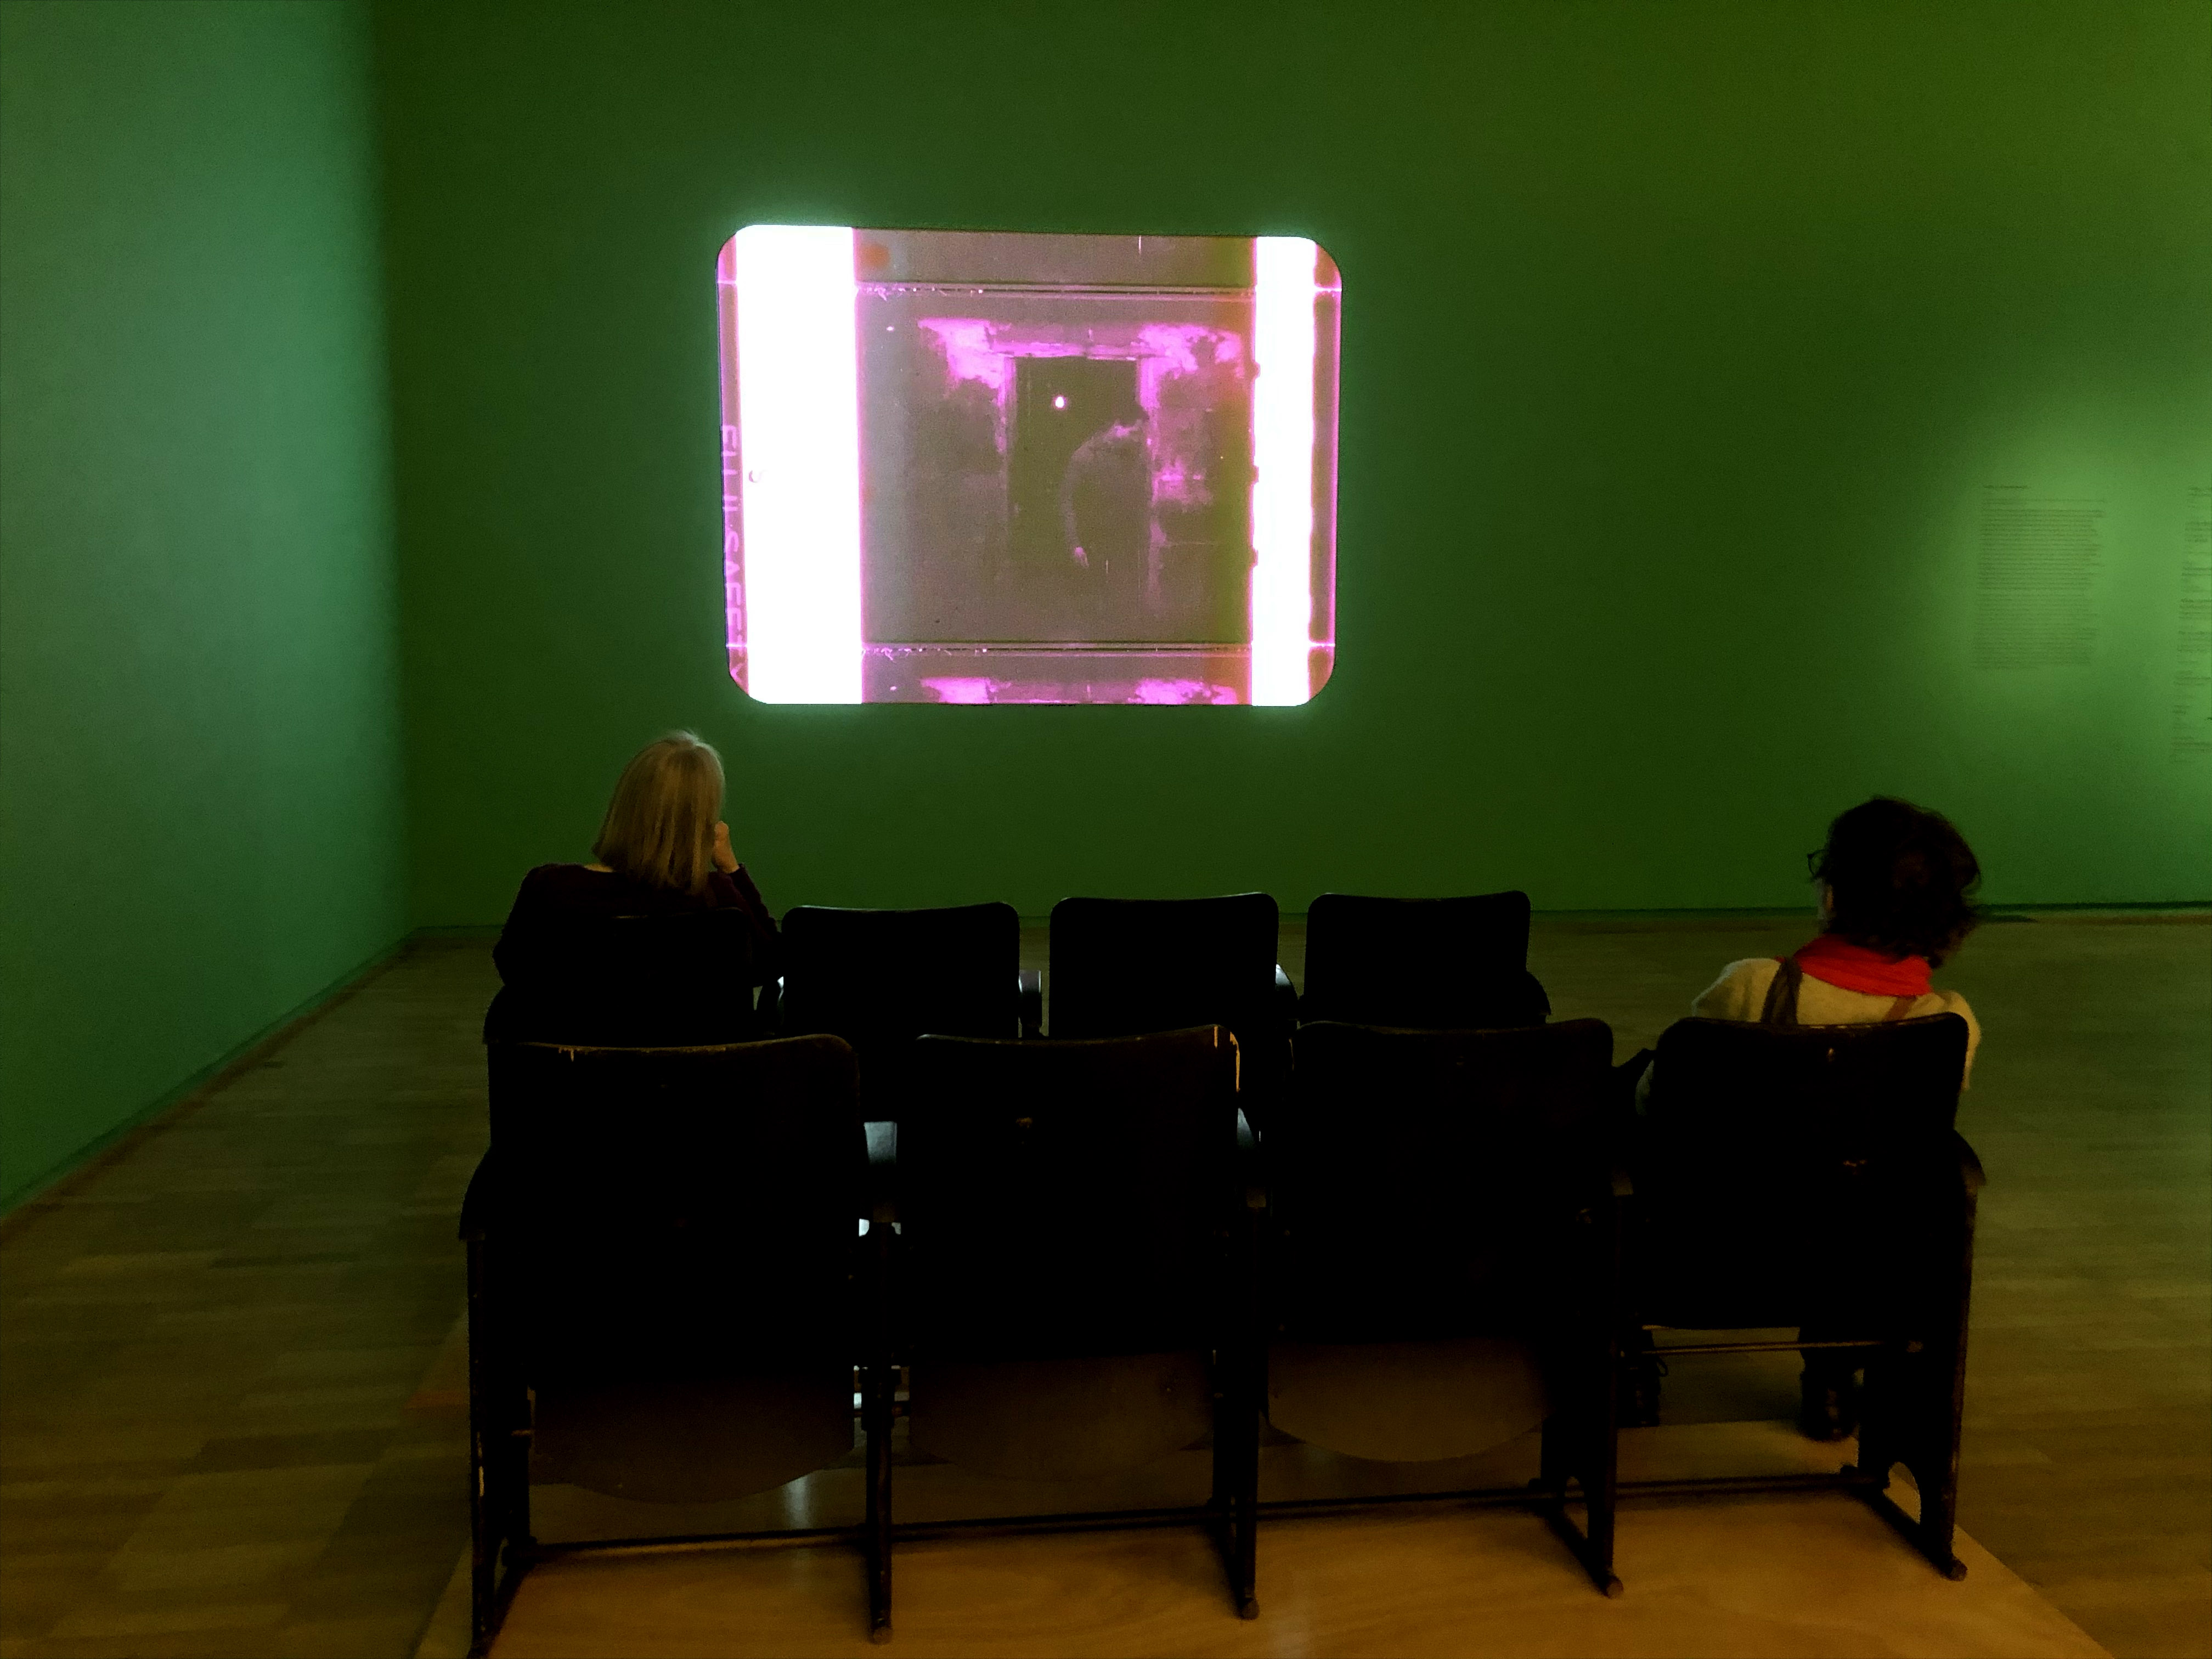 two people sit apart on banks of seats viewing purple tinged projected image on wall